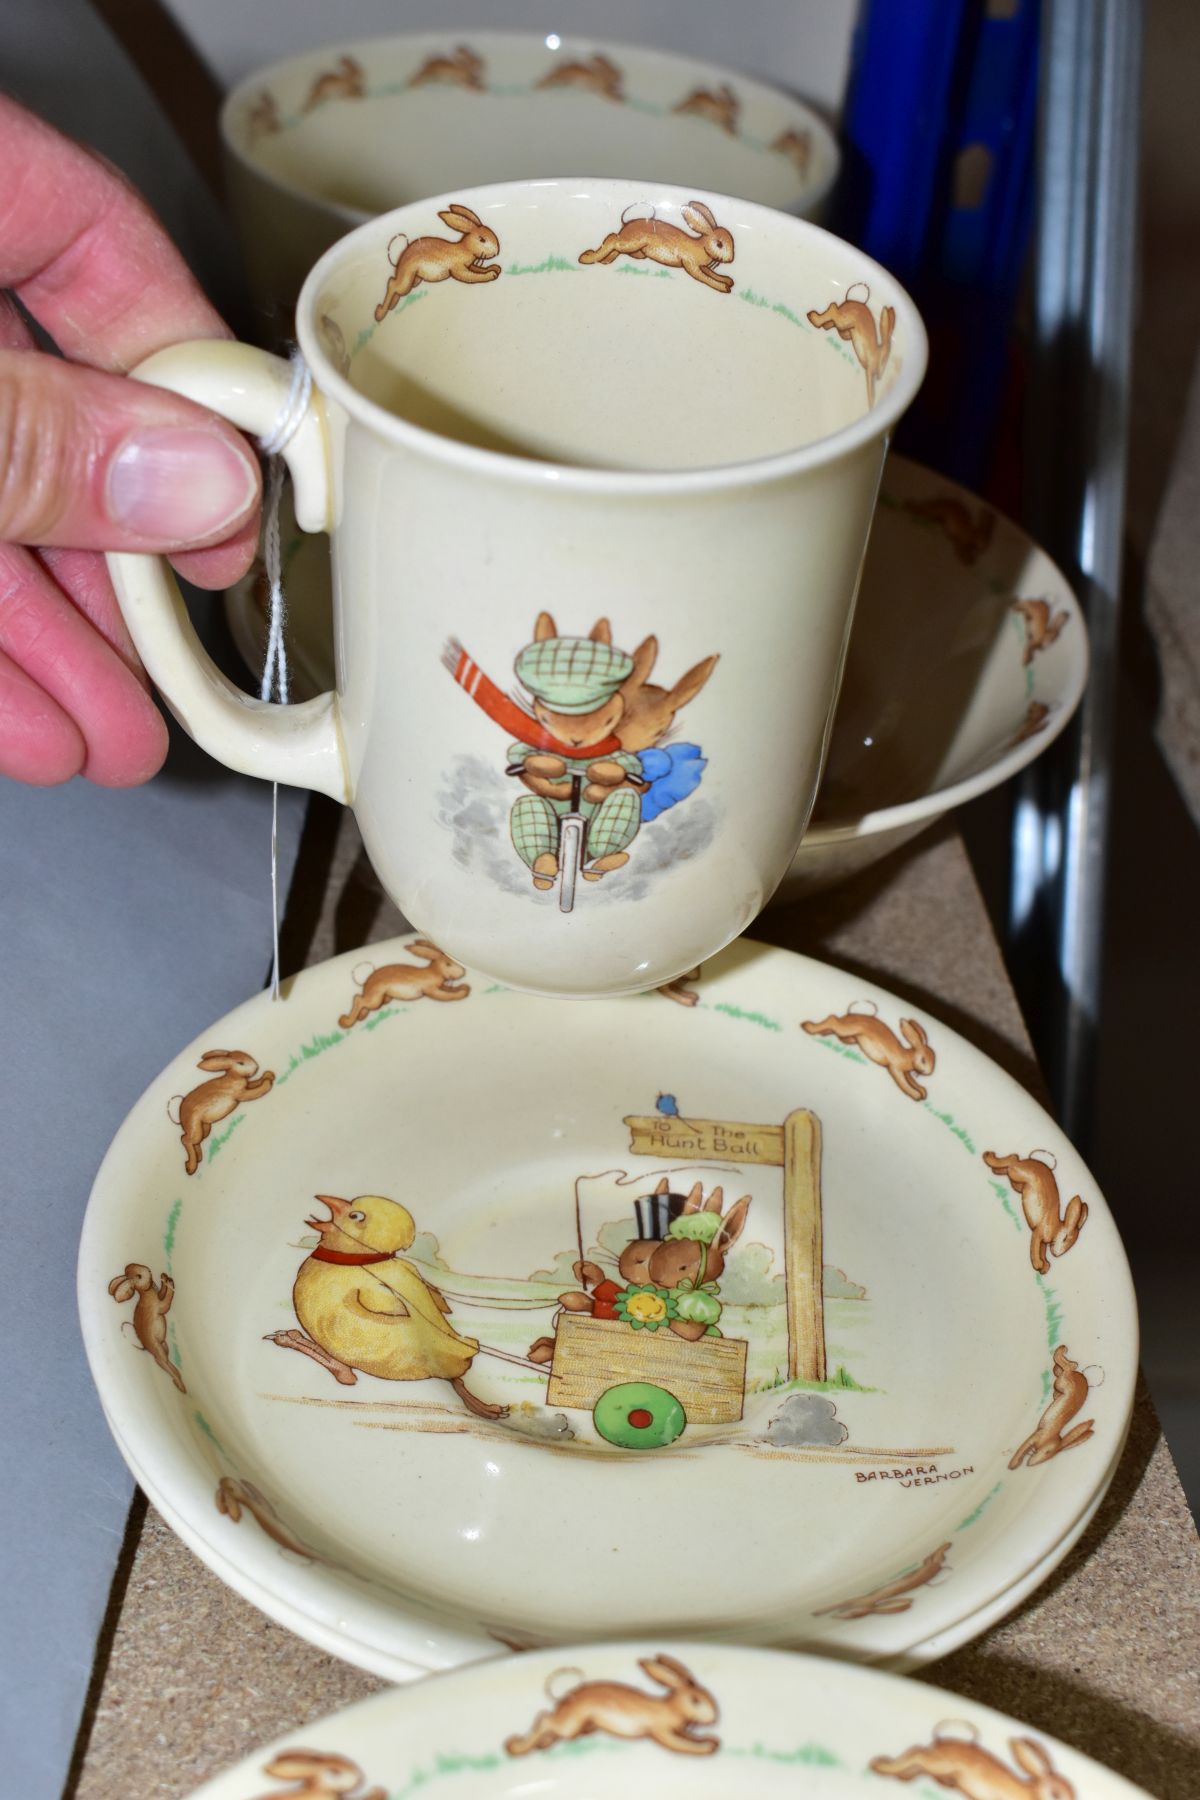 SIX PIECES OF ROYAL DOULTON BUNNYKINS EARTHENWARE TABLES WARES OF CHICKEN PULLING CART, DESIGNED - Image 3 of 10